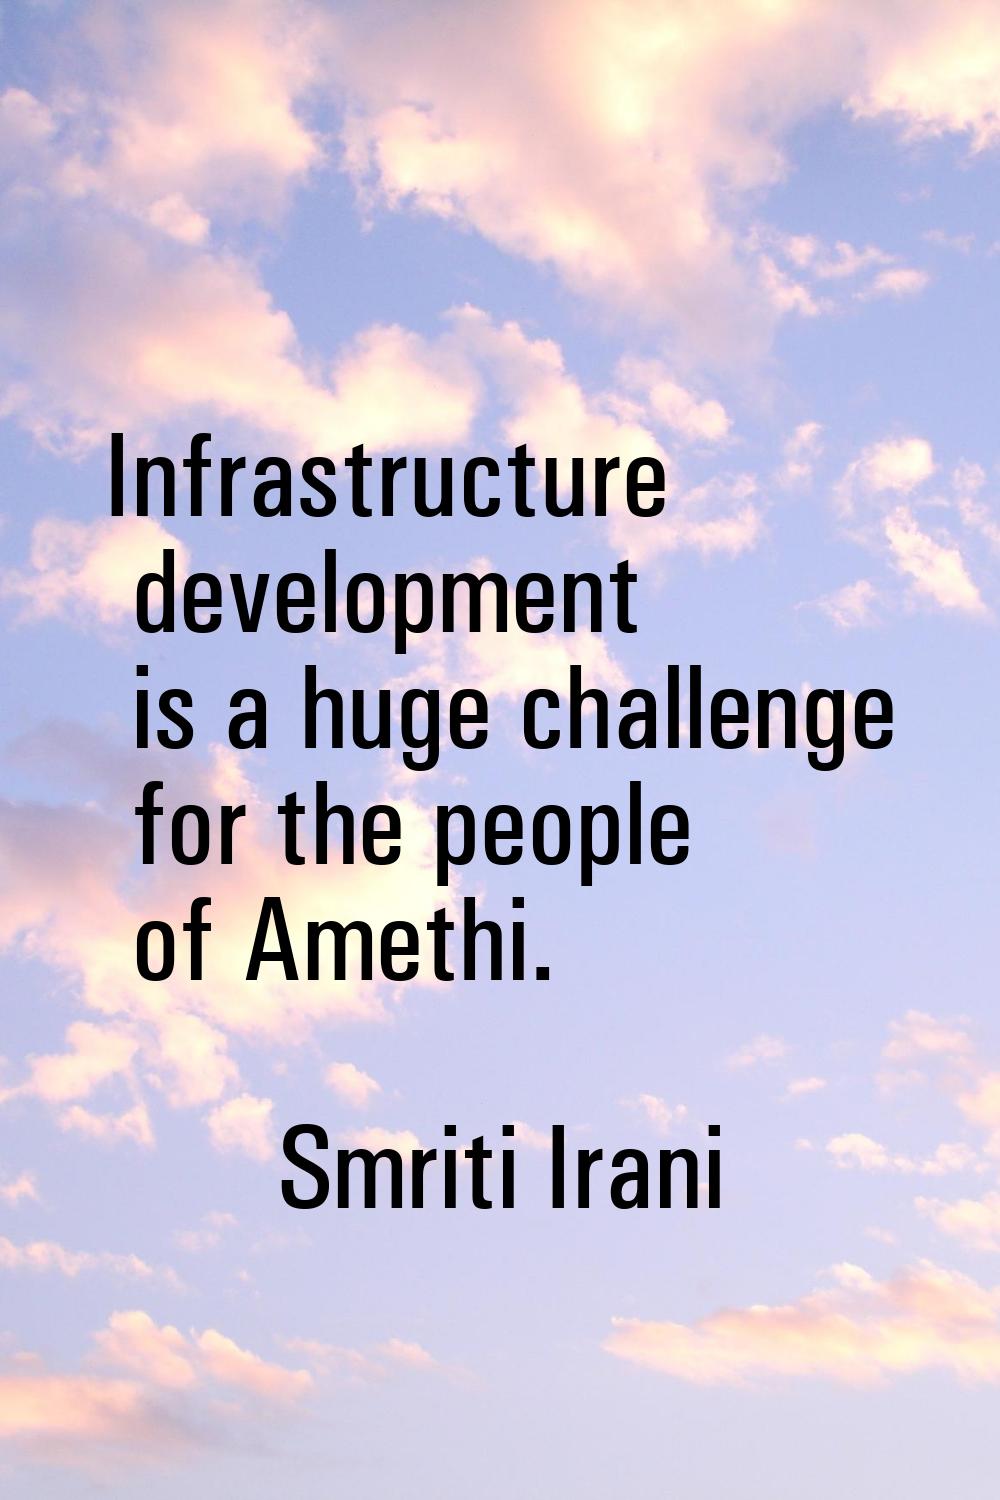 Infrastructure development is a huge challenge for the people of Amethi.